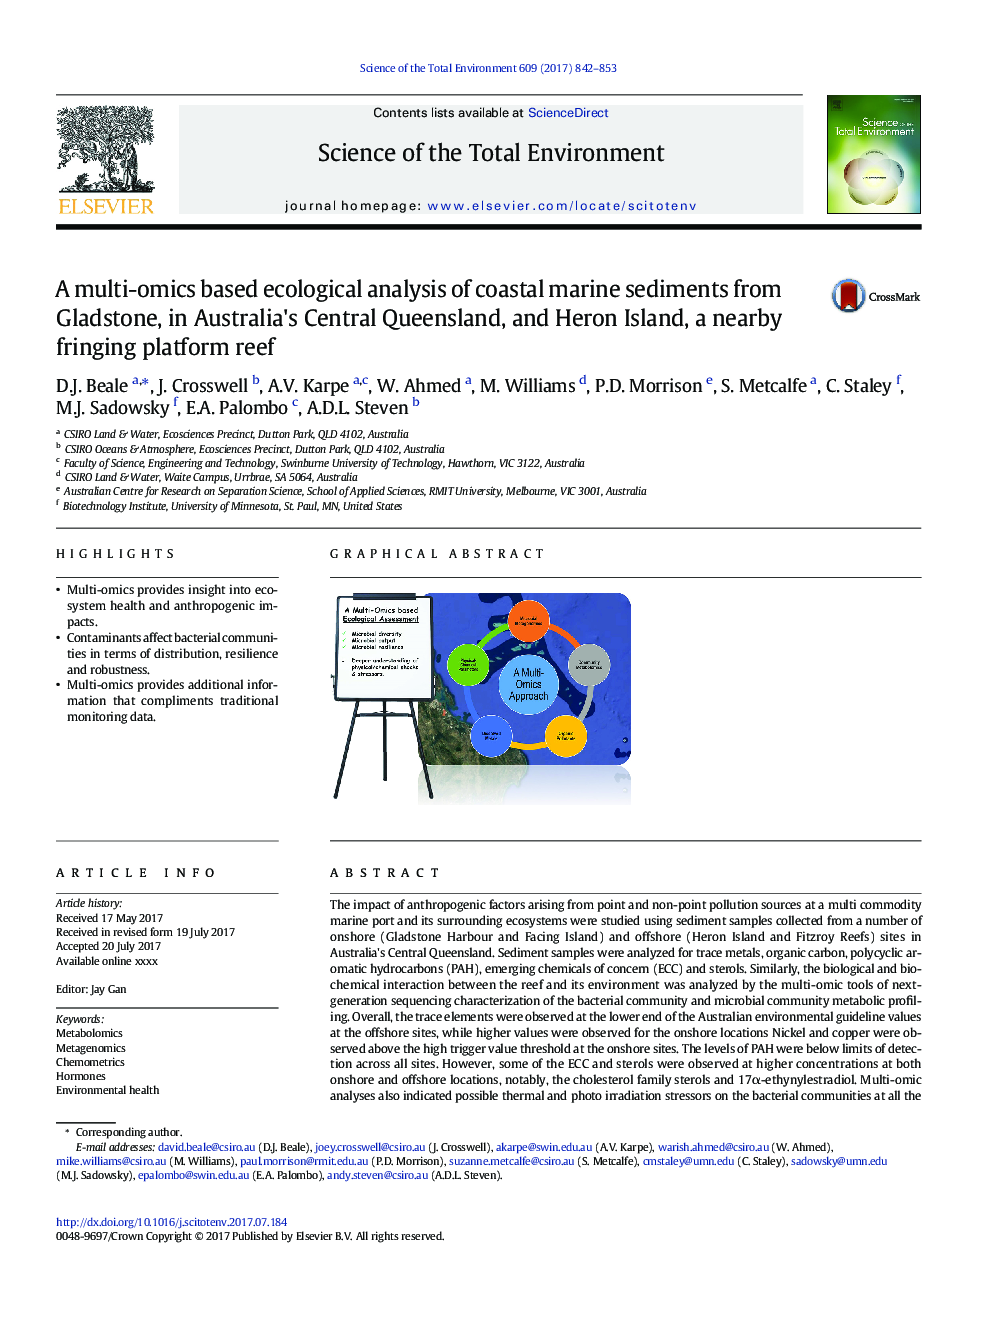 A multi-omics based ecological analysis of coastal marine sediments from Gladstone, in Australia's Central Queensland, and Heron Island, a nearby fringing platform reef